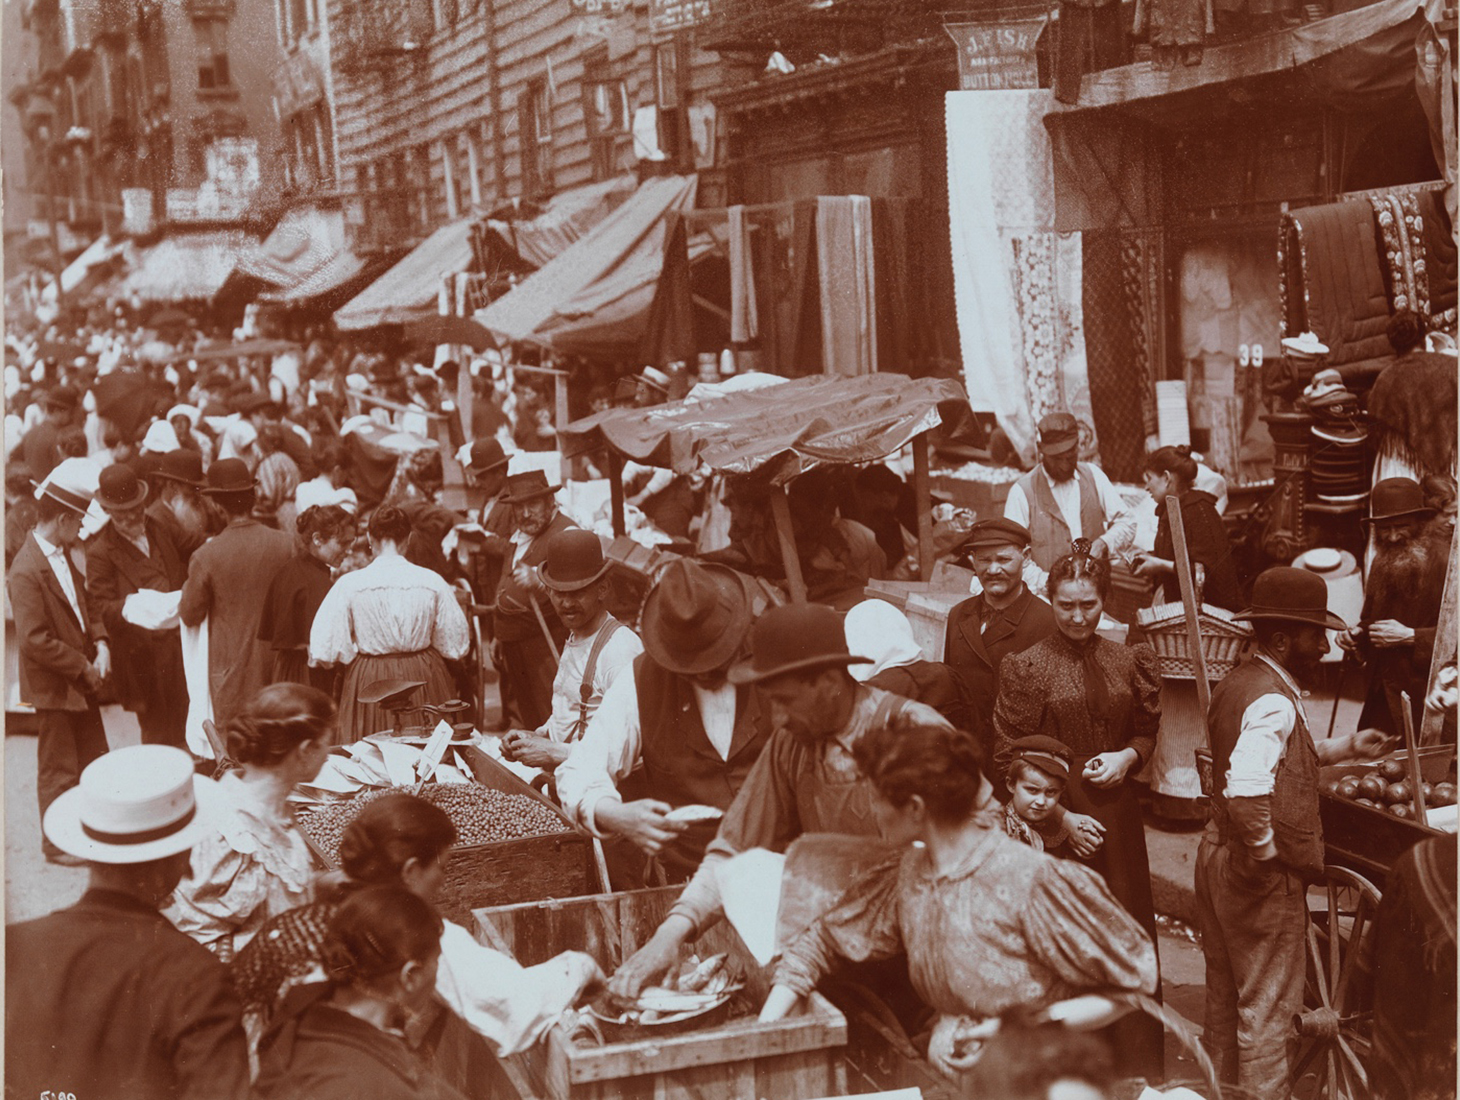 Byron Company. [Street Vendors, 1898. Hester St.] Museum of the City of New York. 93.1.1.18132.